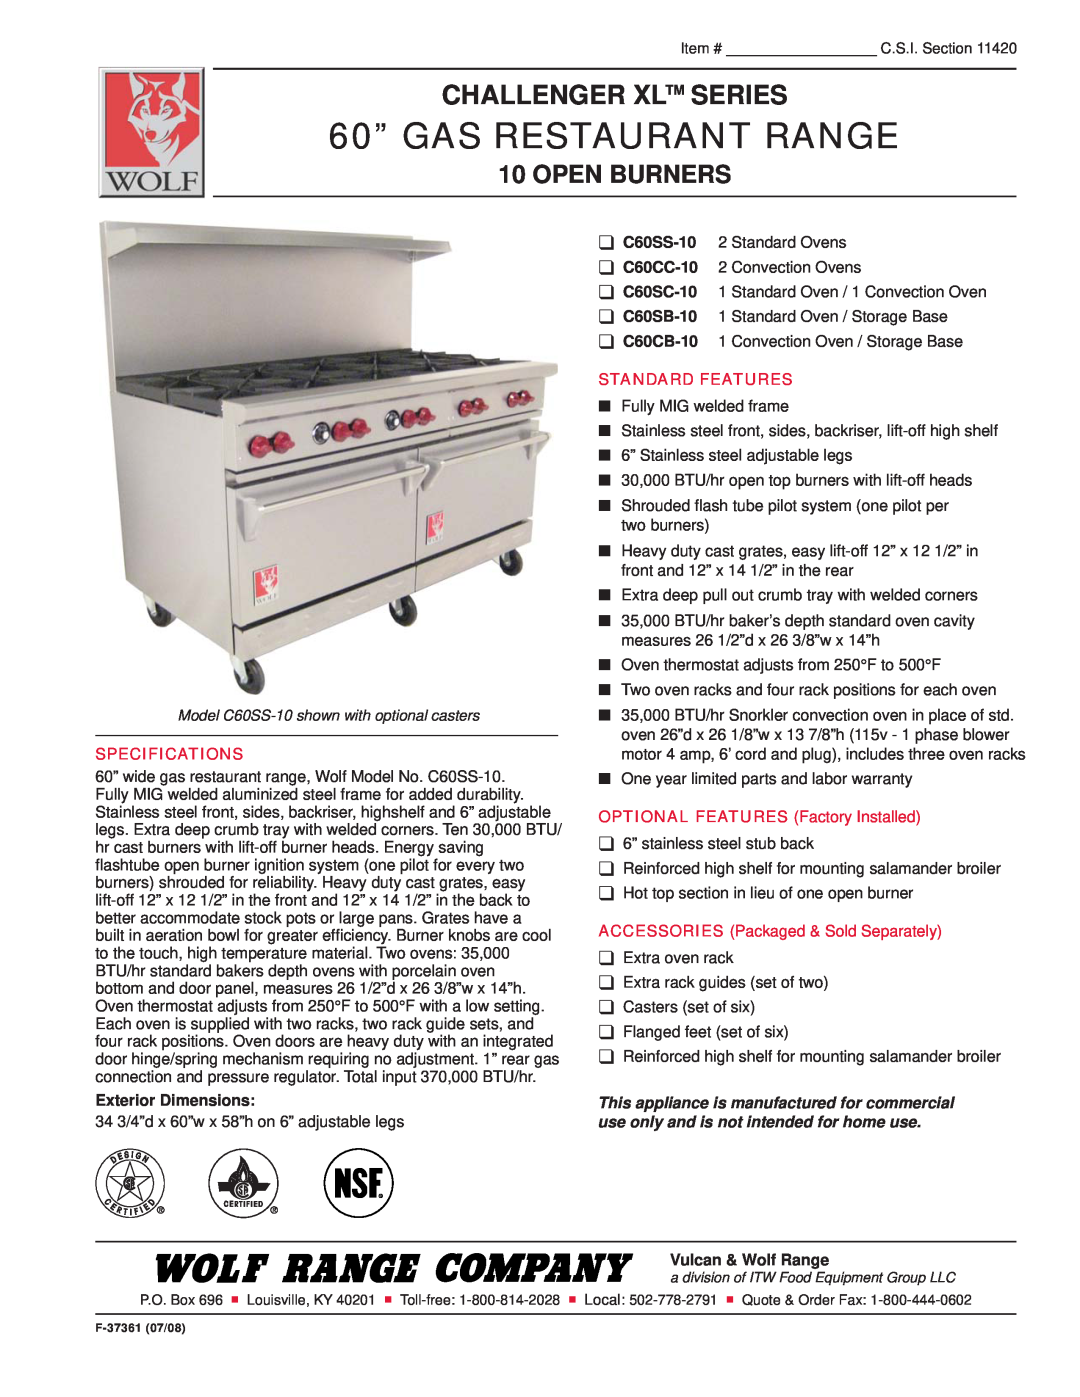 Wolf C60CB-10, C60SS-10 specifications 60” GAS RESTAURANT RANGE, Challenger Xl Series, Open Burners, Specifications 